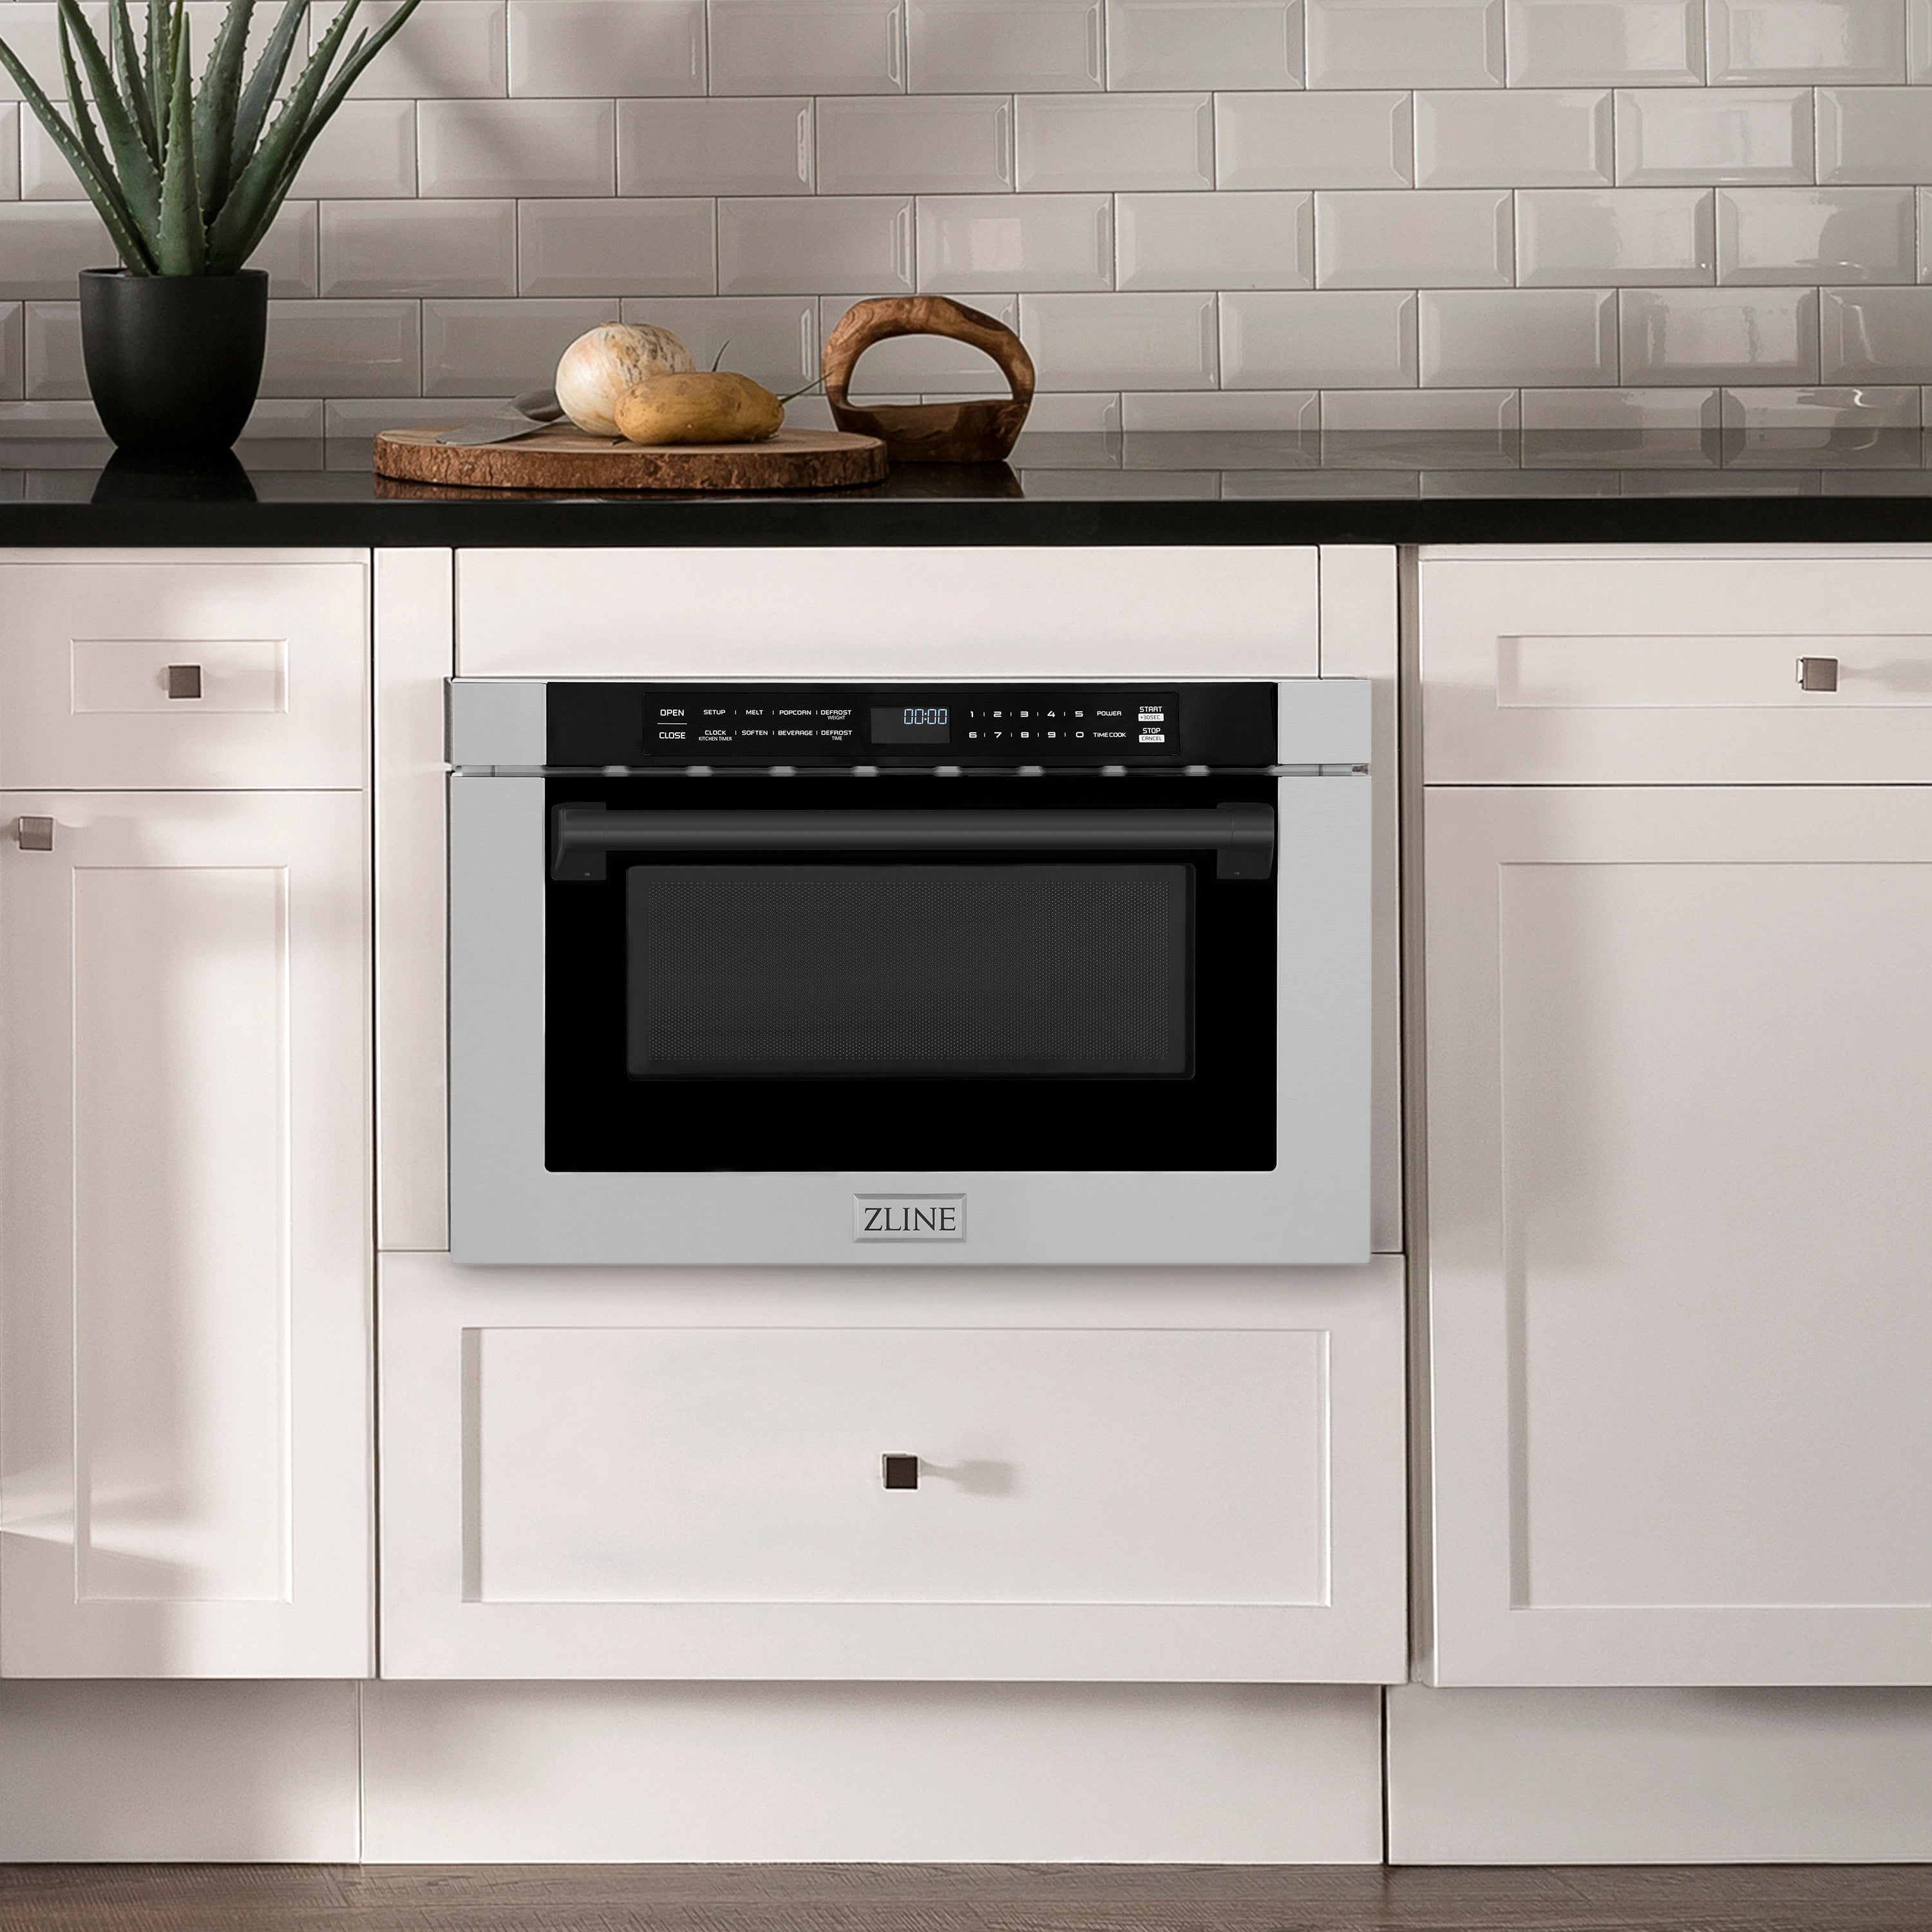 ZLINE Autograph Edition 24 in. 1.2 cu. ft. Built-in Microwave Drawer with a Traditional Handle in Stainless Steel and Matte Black Accents (MWDZ-1-H-MB) in Rustic Farmhouse Style Kitchen with white cabinets and black countertops.